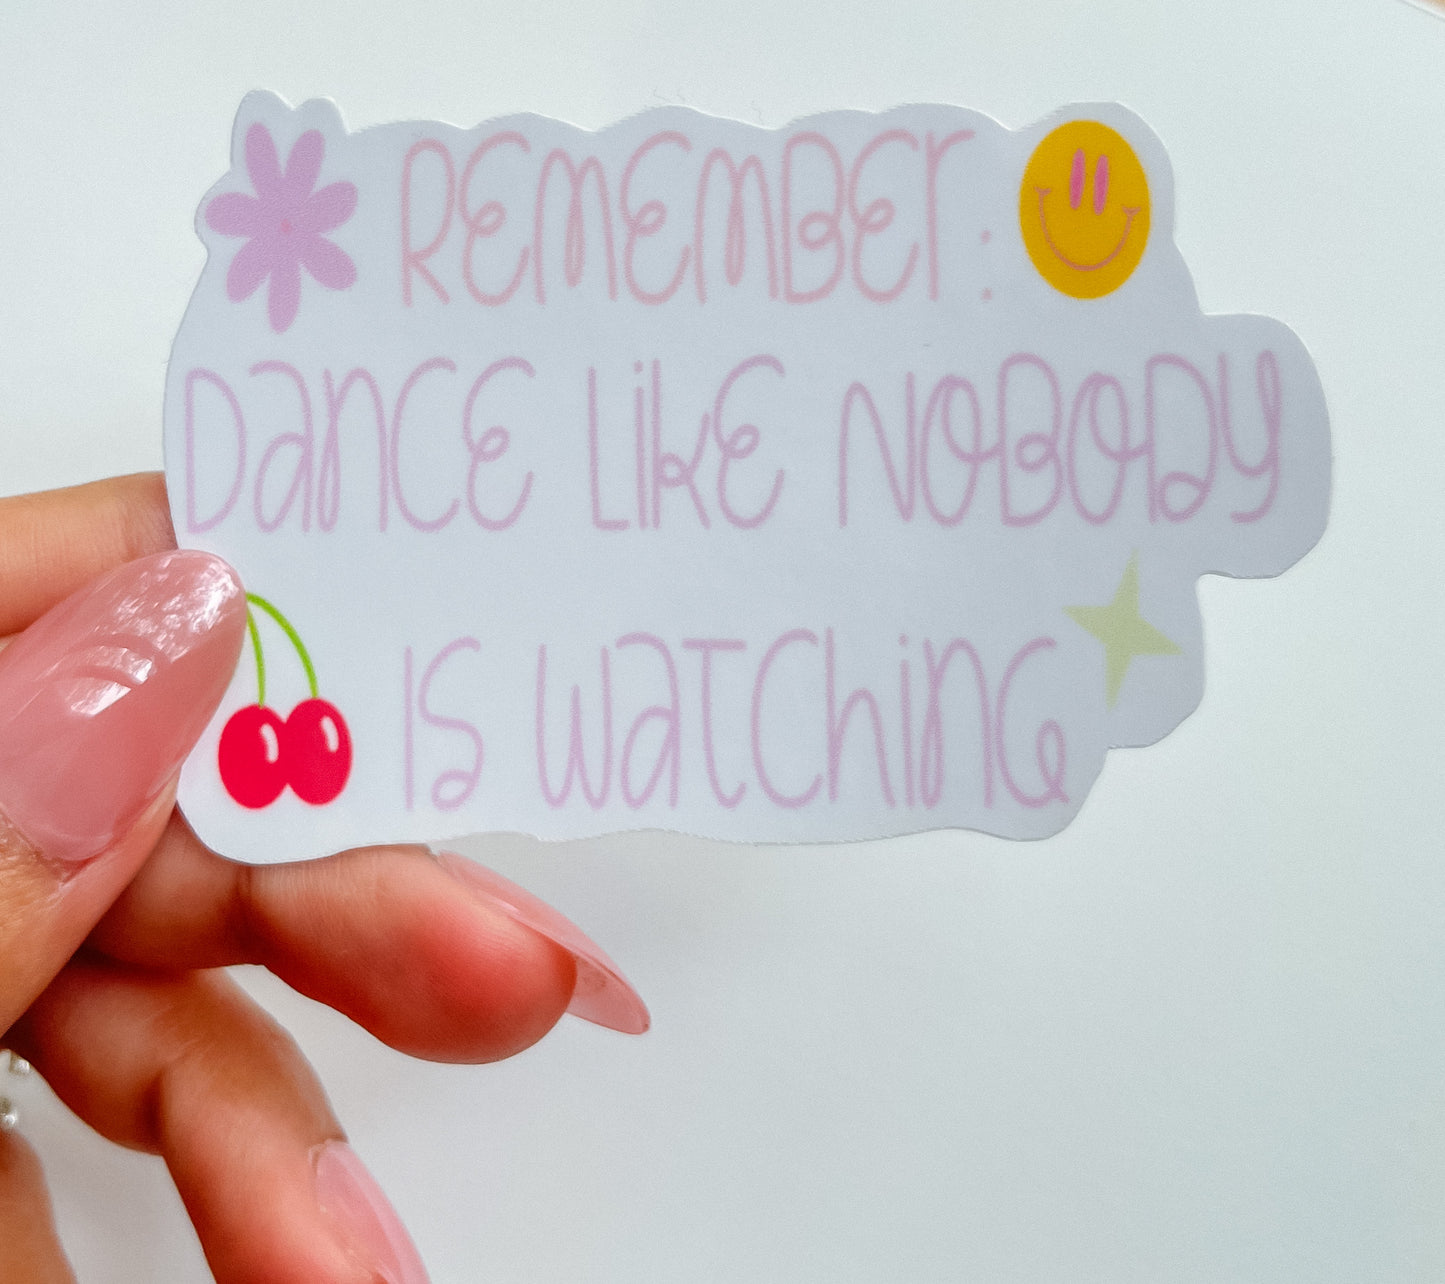 Remember To Dance Like No One Is Watching Sticker